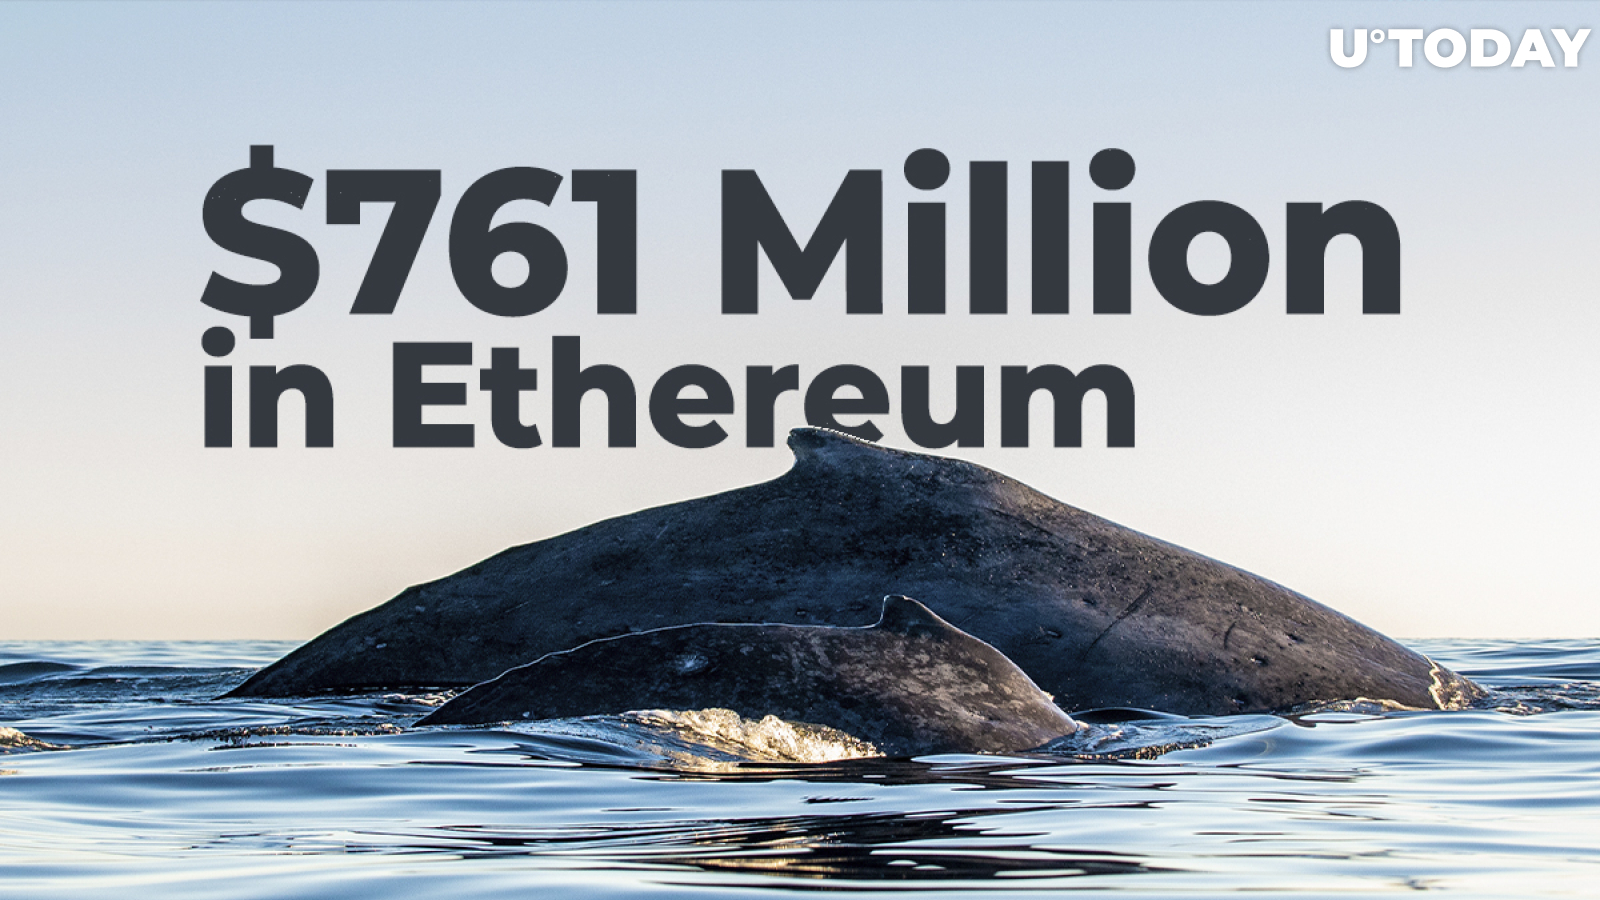 Whales Move $761 Million in Ethereum, While Coin Recovers to $3,500